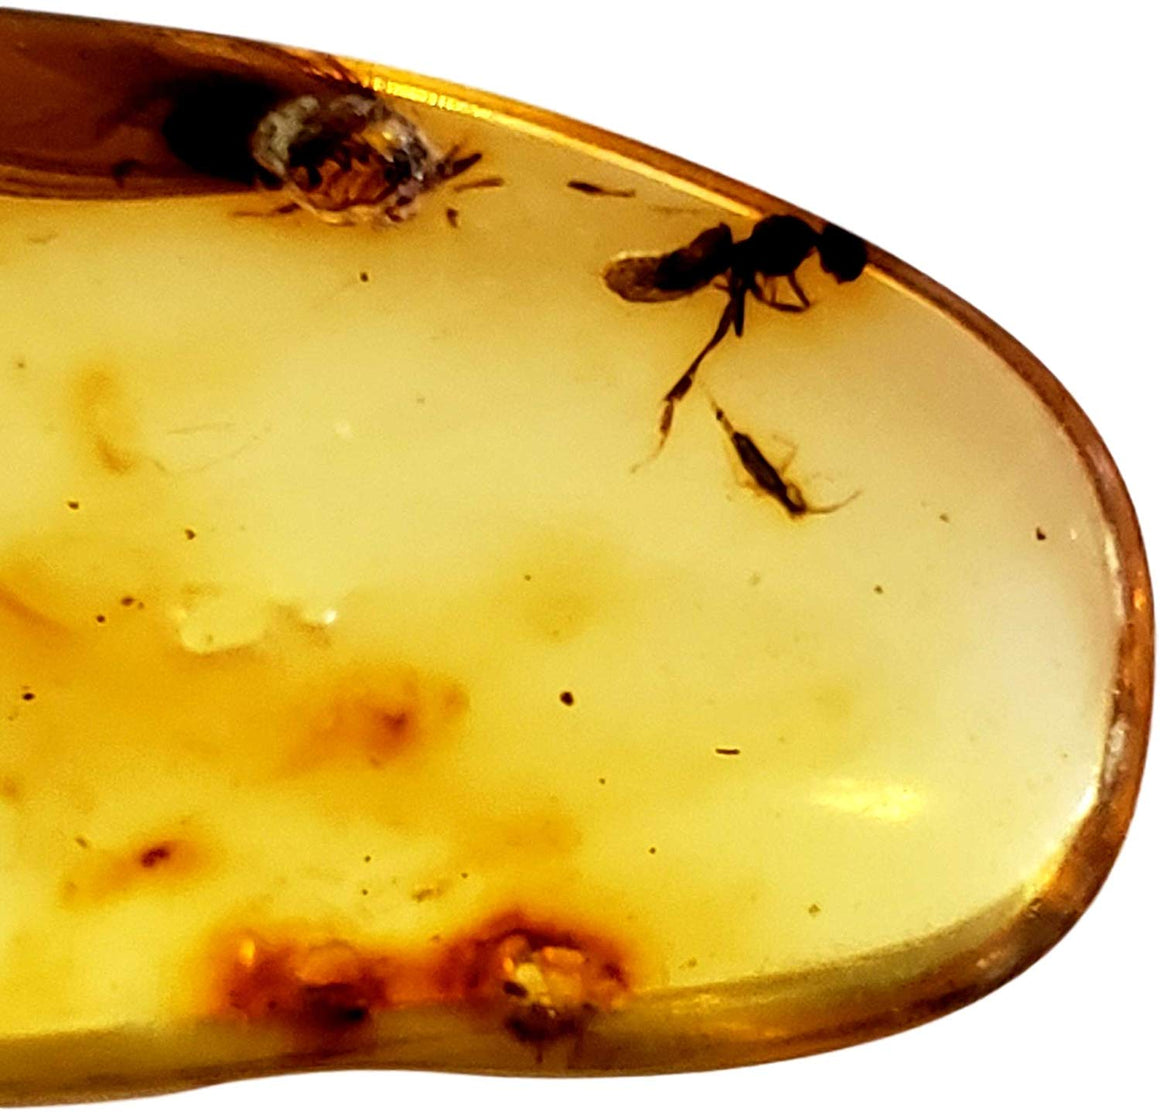 Genuine Amber Fossil Specimen - Multiple Insect Inclusions - Naturally Formed from Colombia with Bugs Inside - Museum Grade, A-Grade - Great Collectible - Piece #7 (78mm x 18mm) - dinosaursrocksuperstore